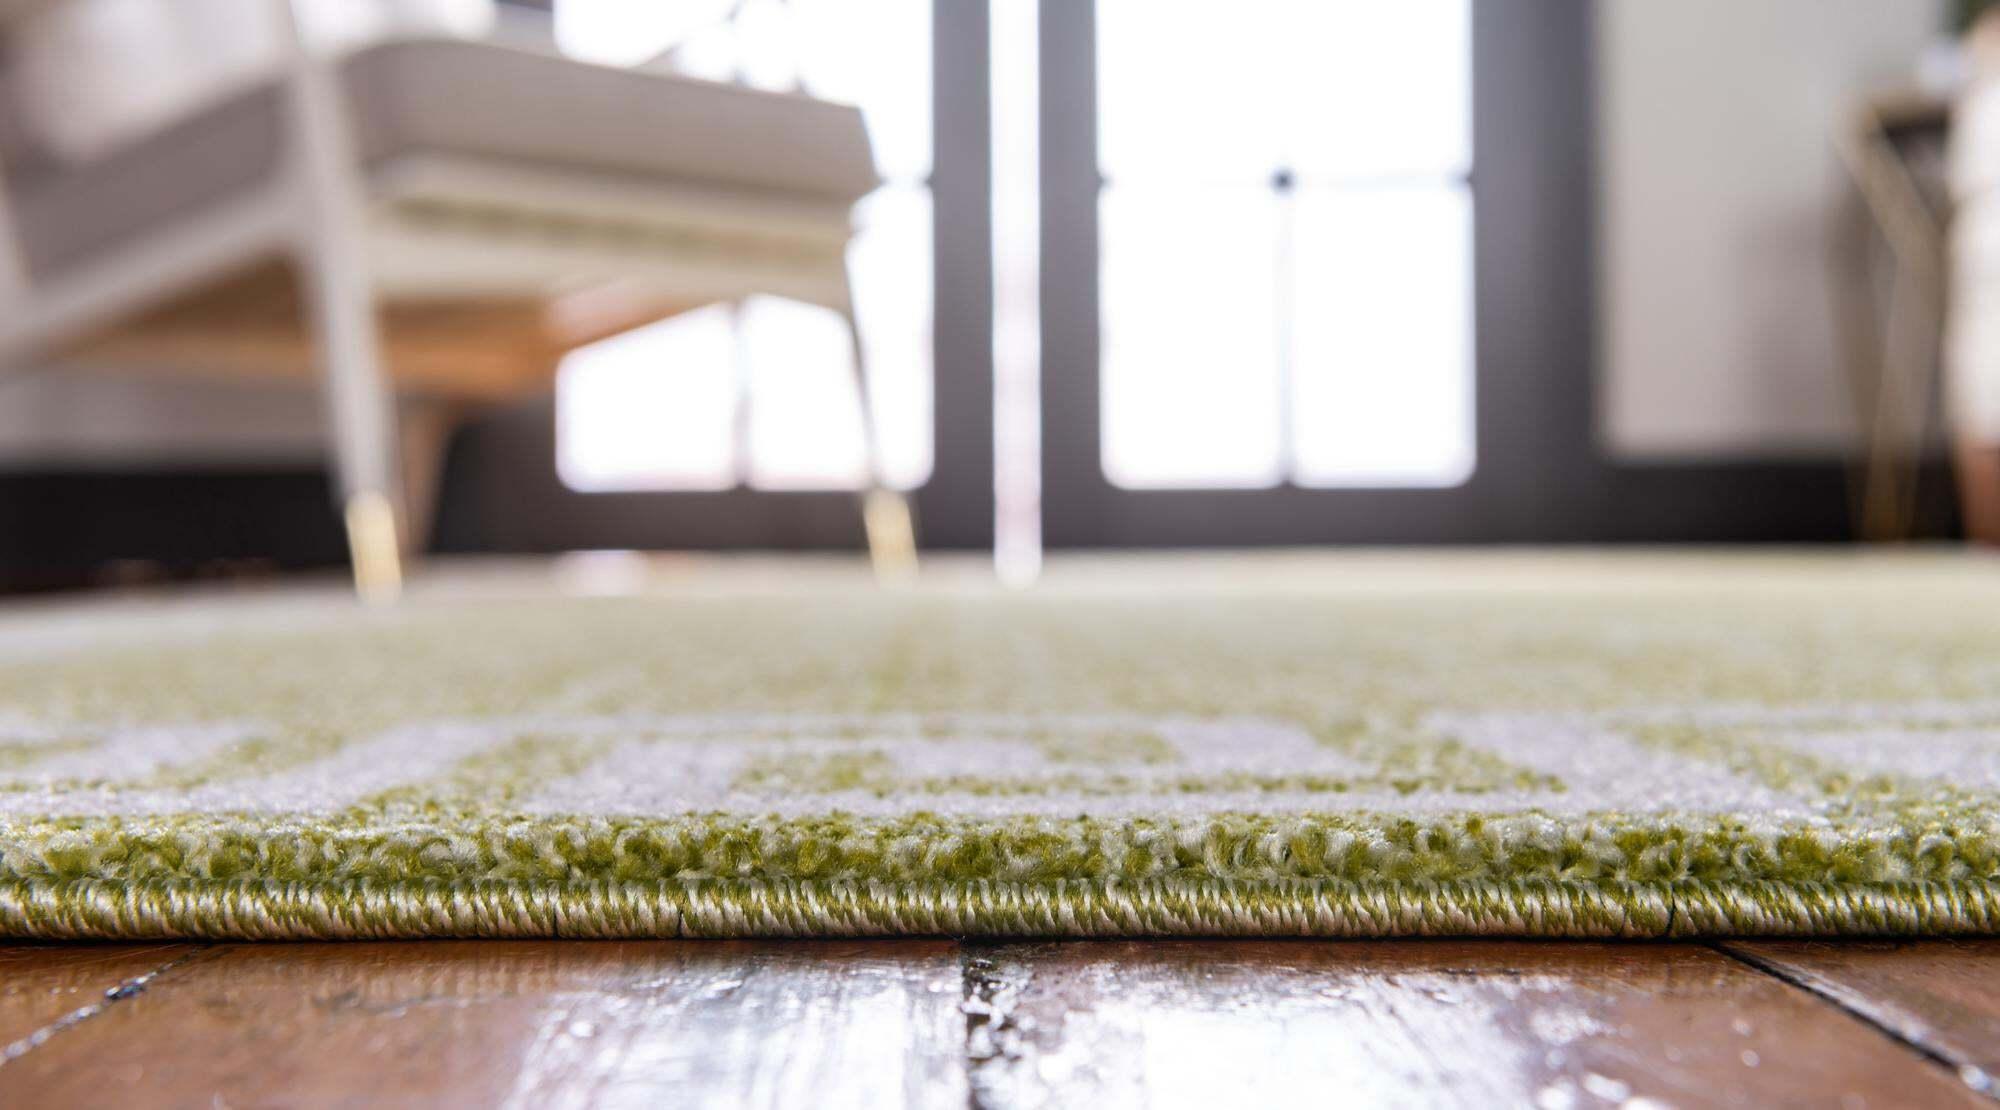 Unique Loom Indoor Rugs - Athens 5' x 8' Rectangle Rug Light Green